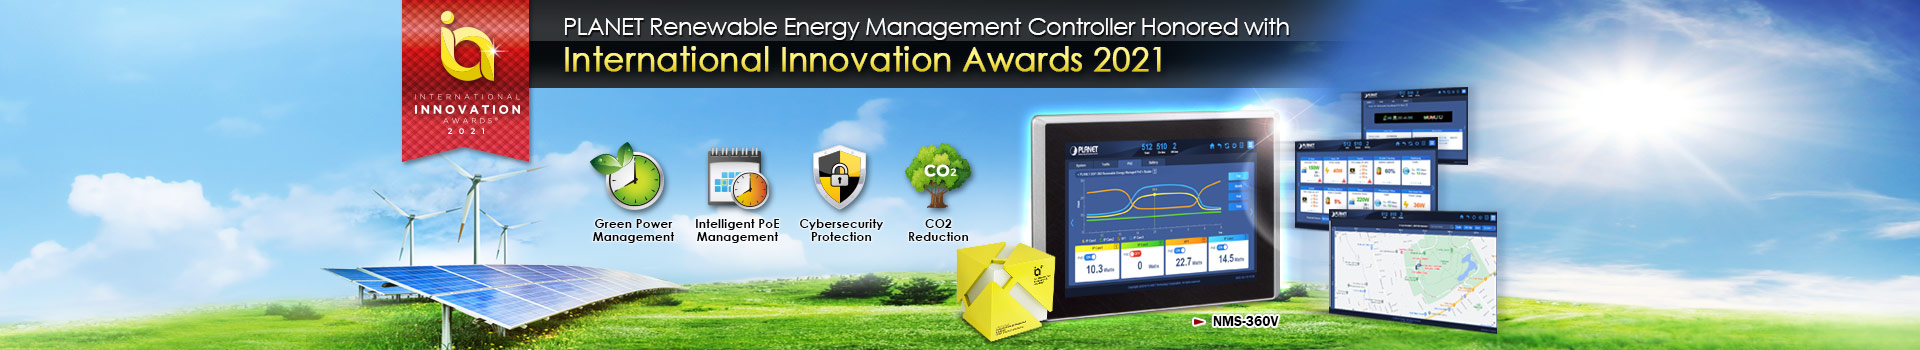 PLANET Renewable Energy Management Controller Honored with International Innovation Awards 2021, Green Power, Intelligent PoE, Cybersecurity, CO2 Reduction